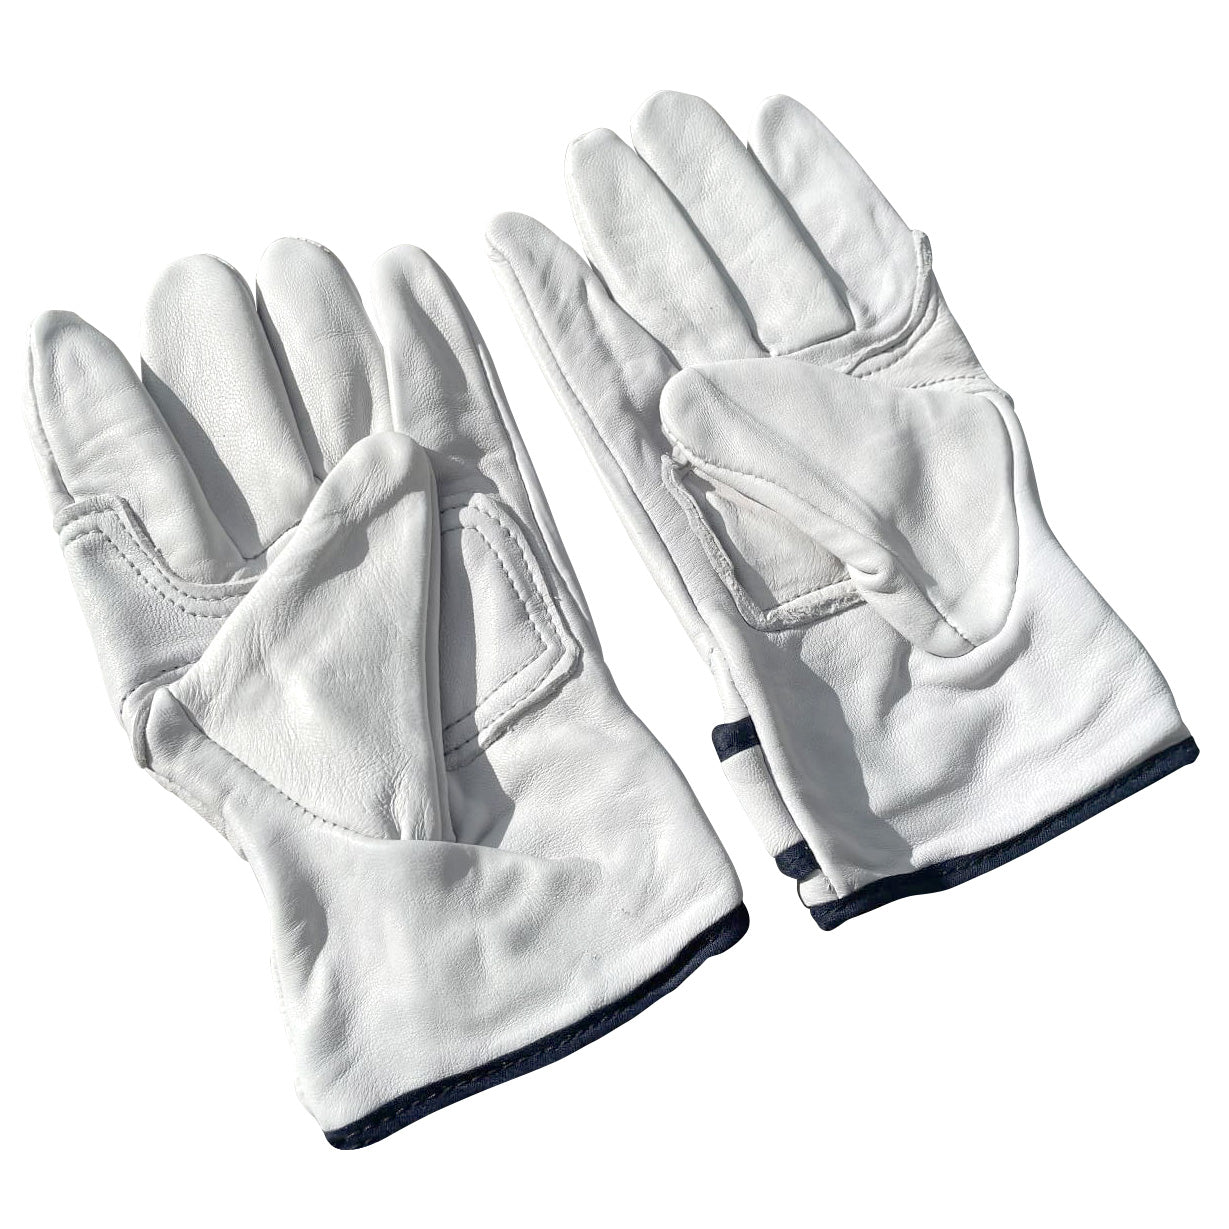 Construction Gloves and Utility Gloves